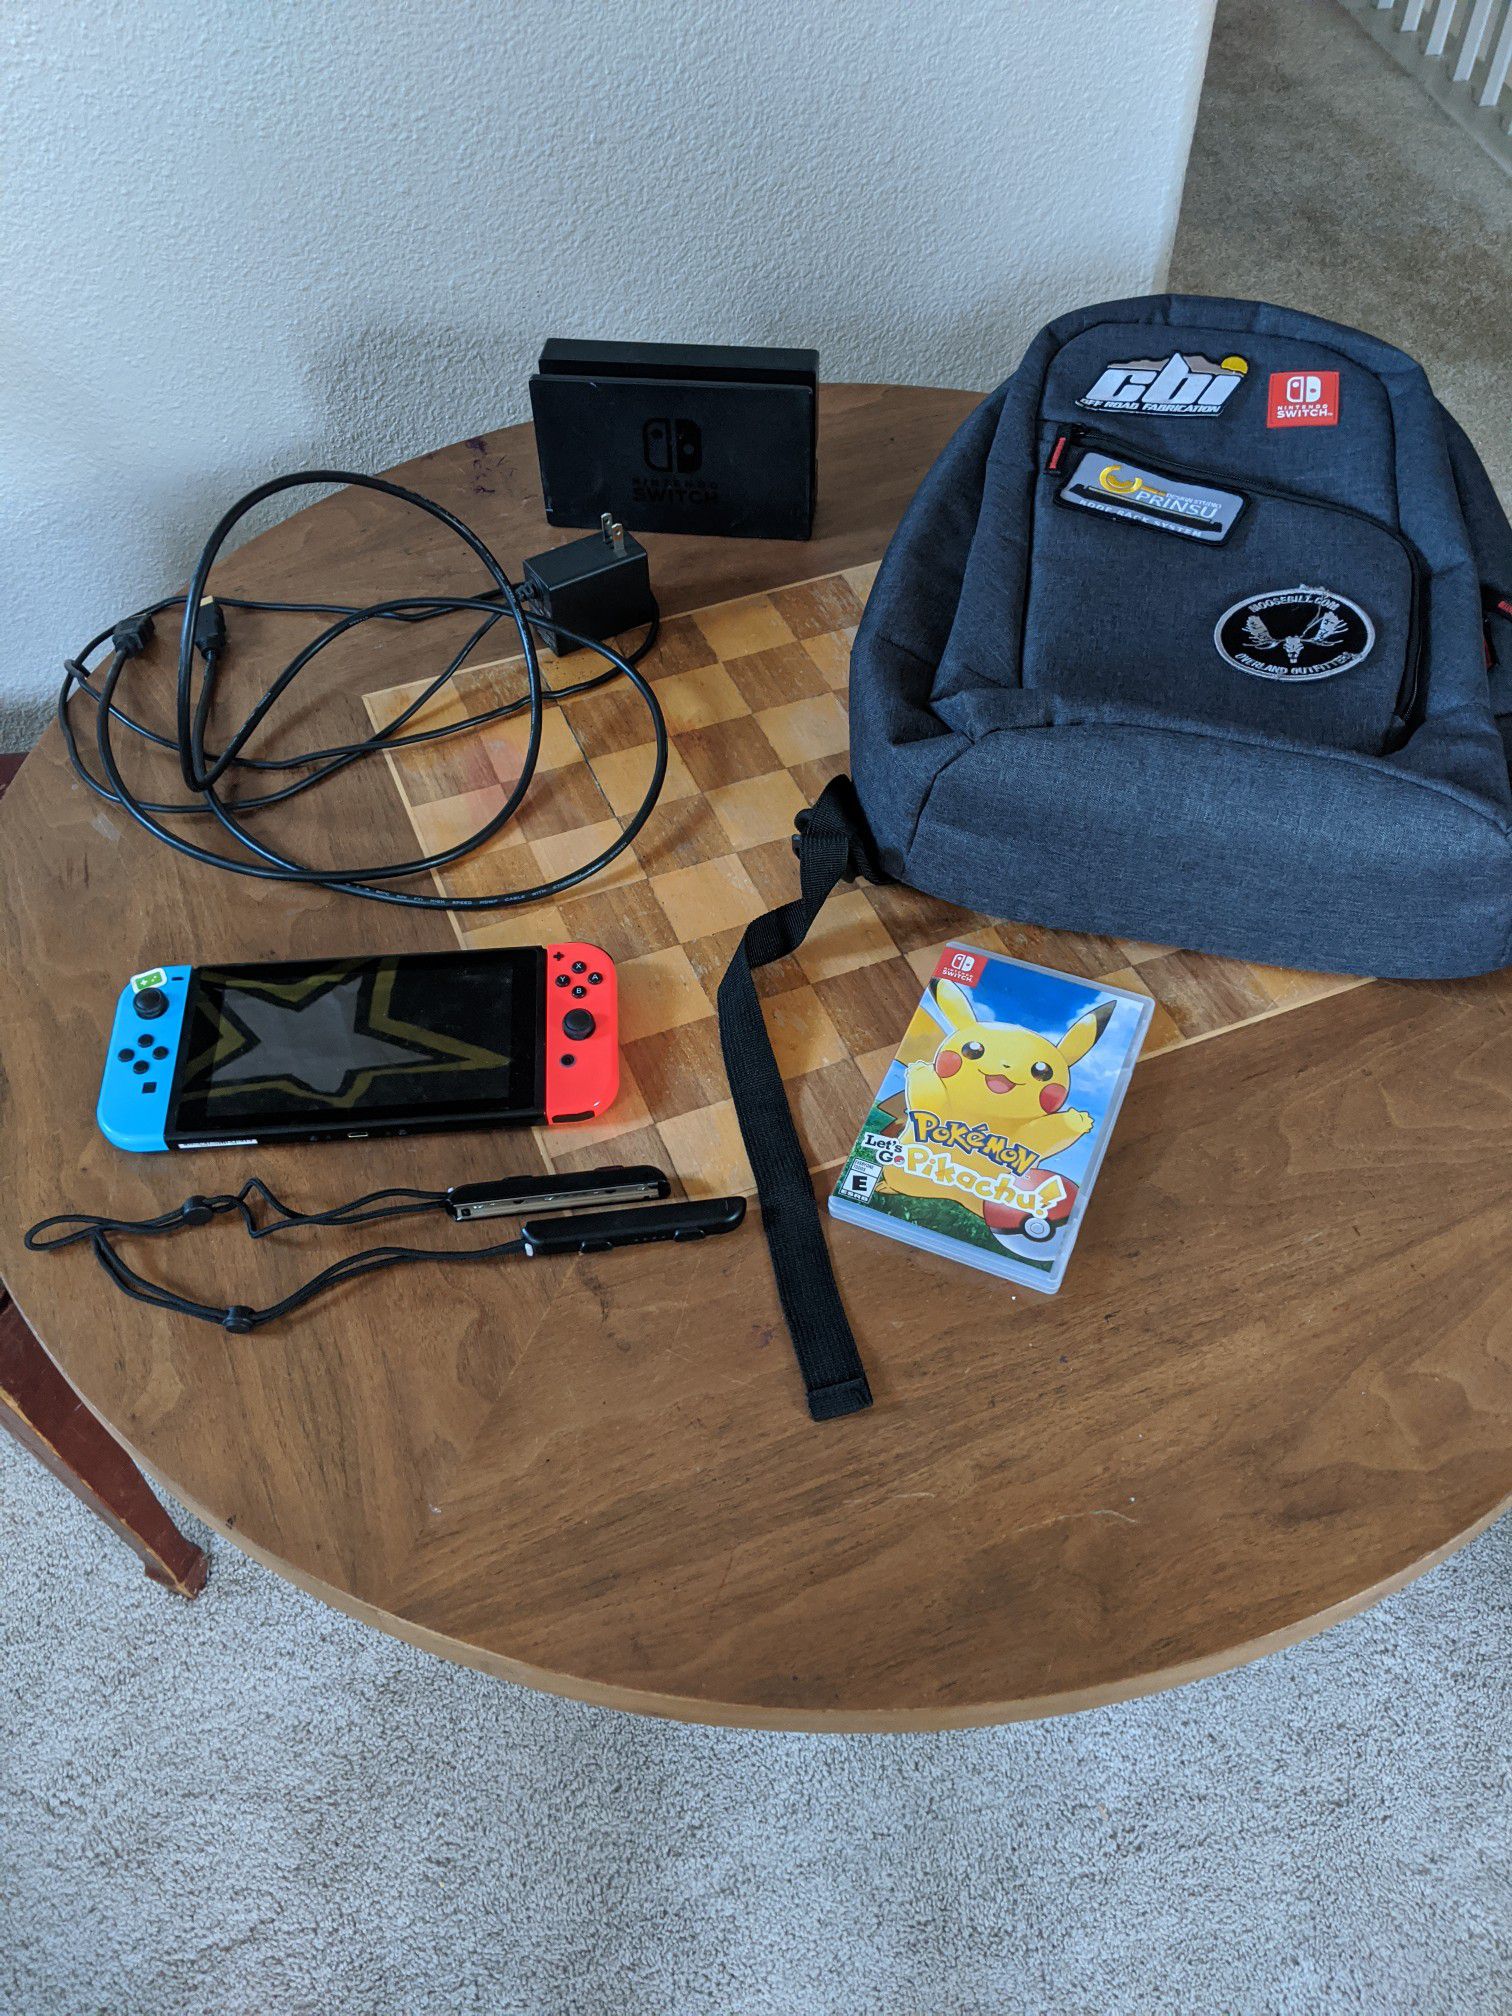 Nintendo switch with games and accessories